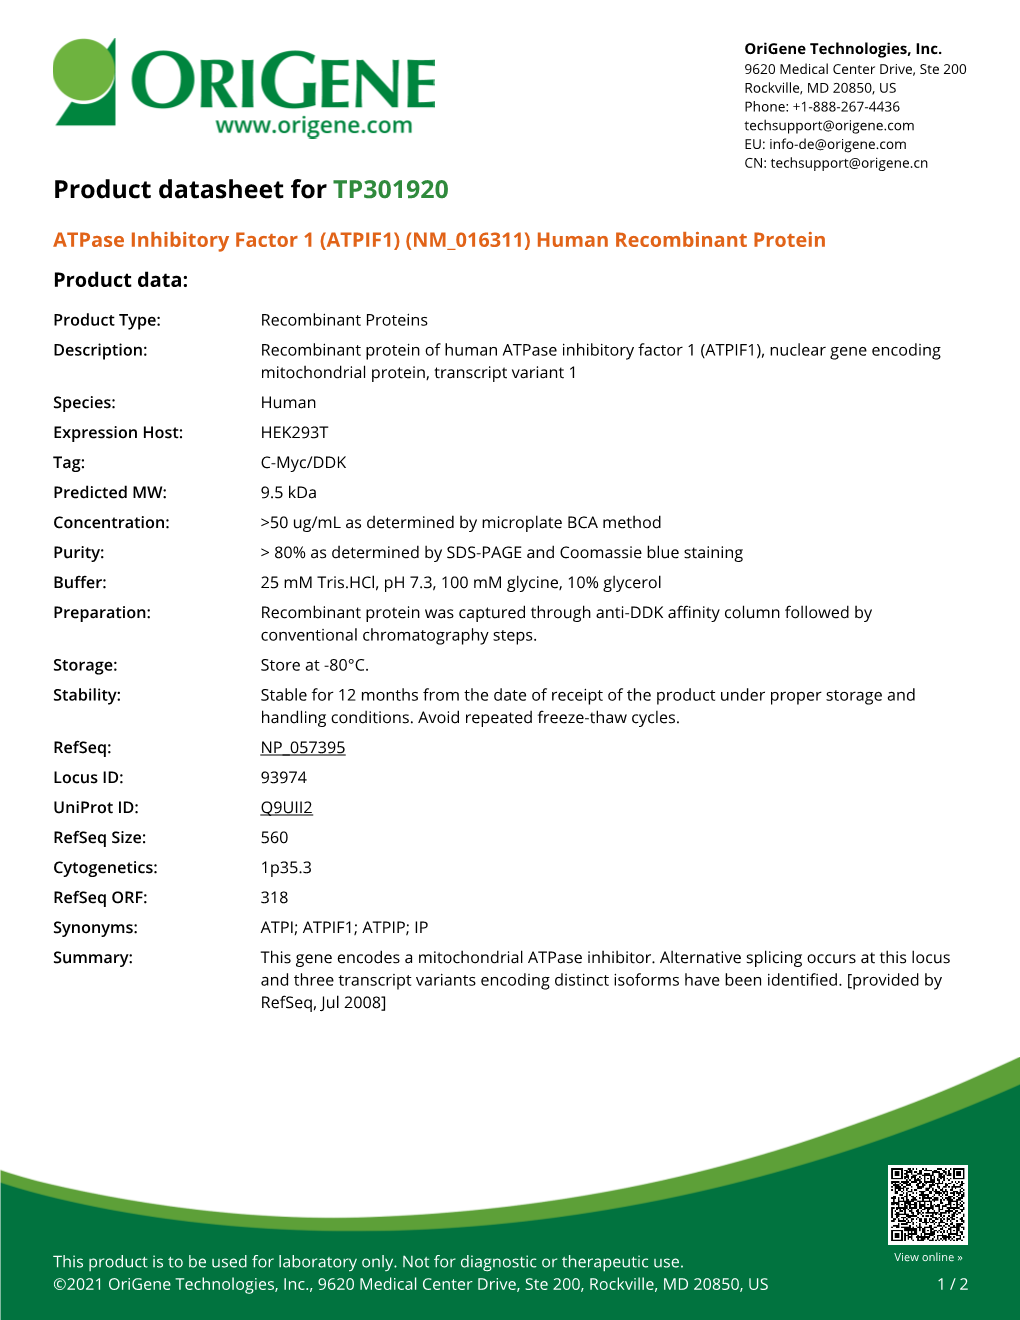 Atpase Inhibitory Factor 1 (ATPIF1) (NM 016311) Human Recombinant Protein Product Data